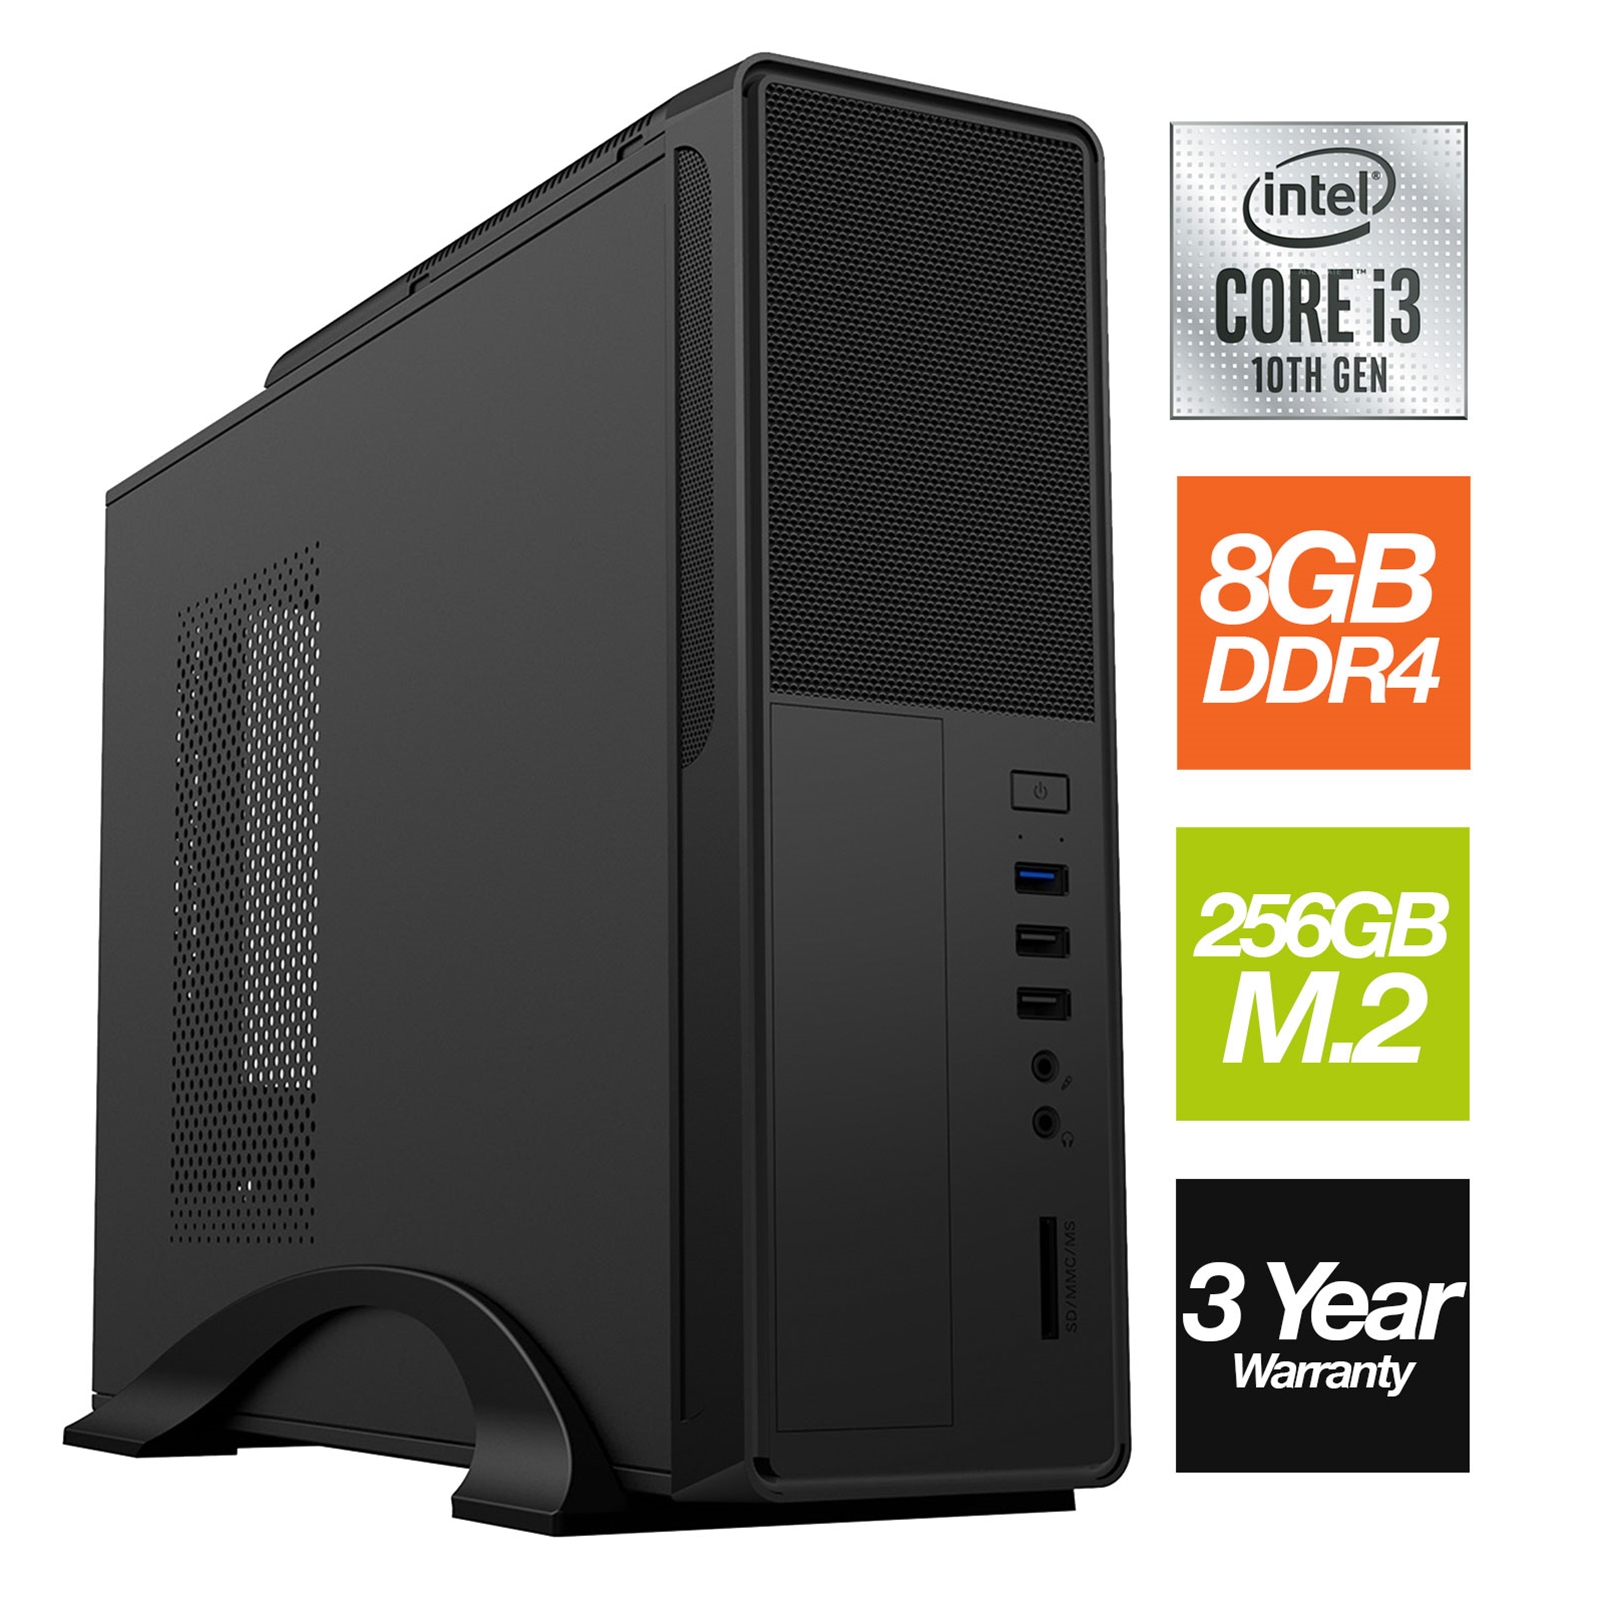 Small Form Factor - Intel i3 10100 Quad Core 8 Thread 3.60GHz (4.30GHz Boost), 8GB RAM, 256GB NVMe M.2, Win 10 Pro Installed - No Optical, Small Foot Print for Home or Office Use - Pre-Built PC